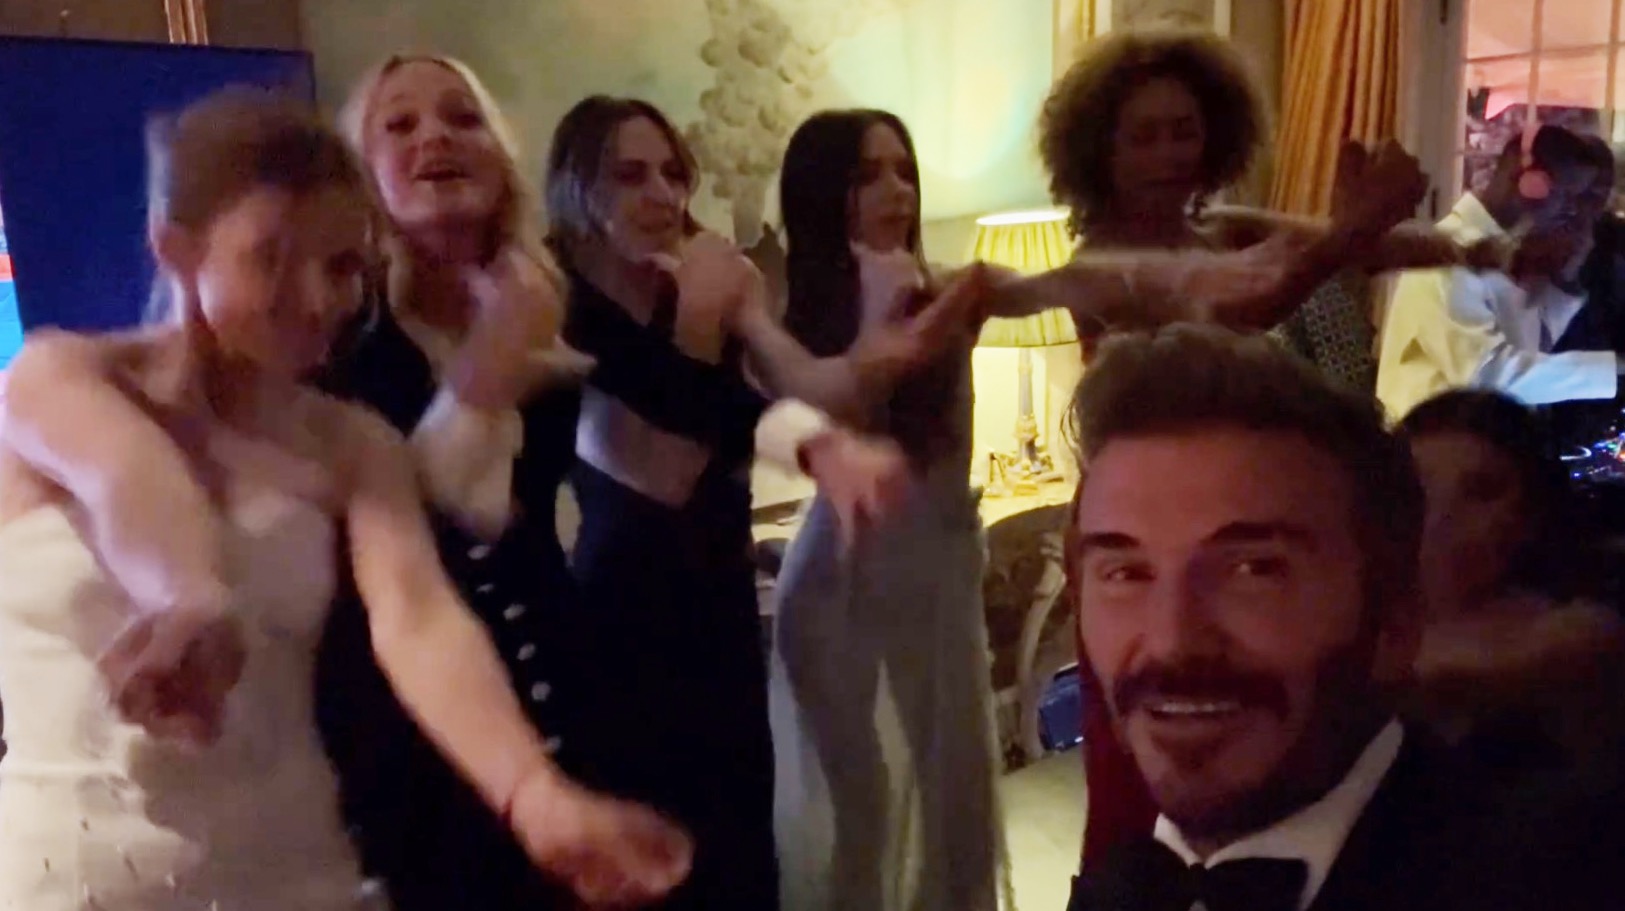 David cheered on the girls as they danced